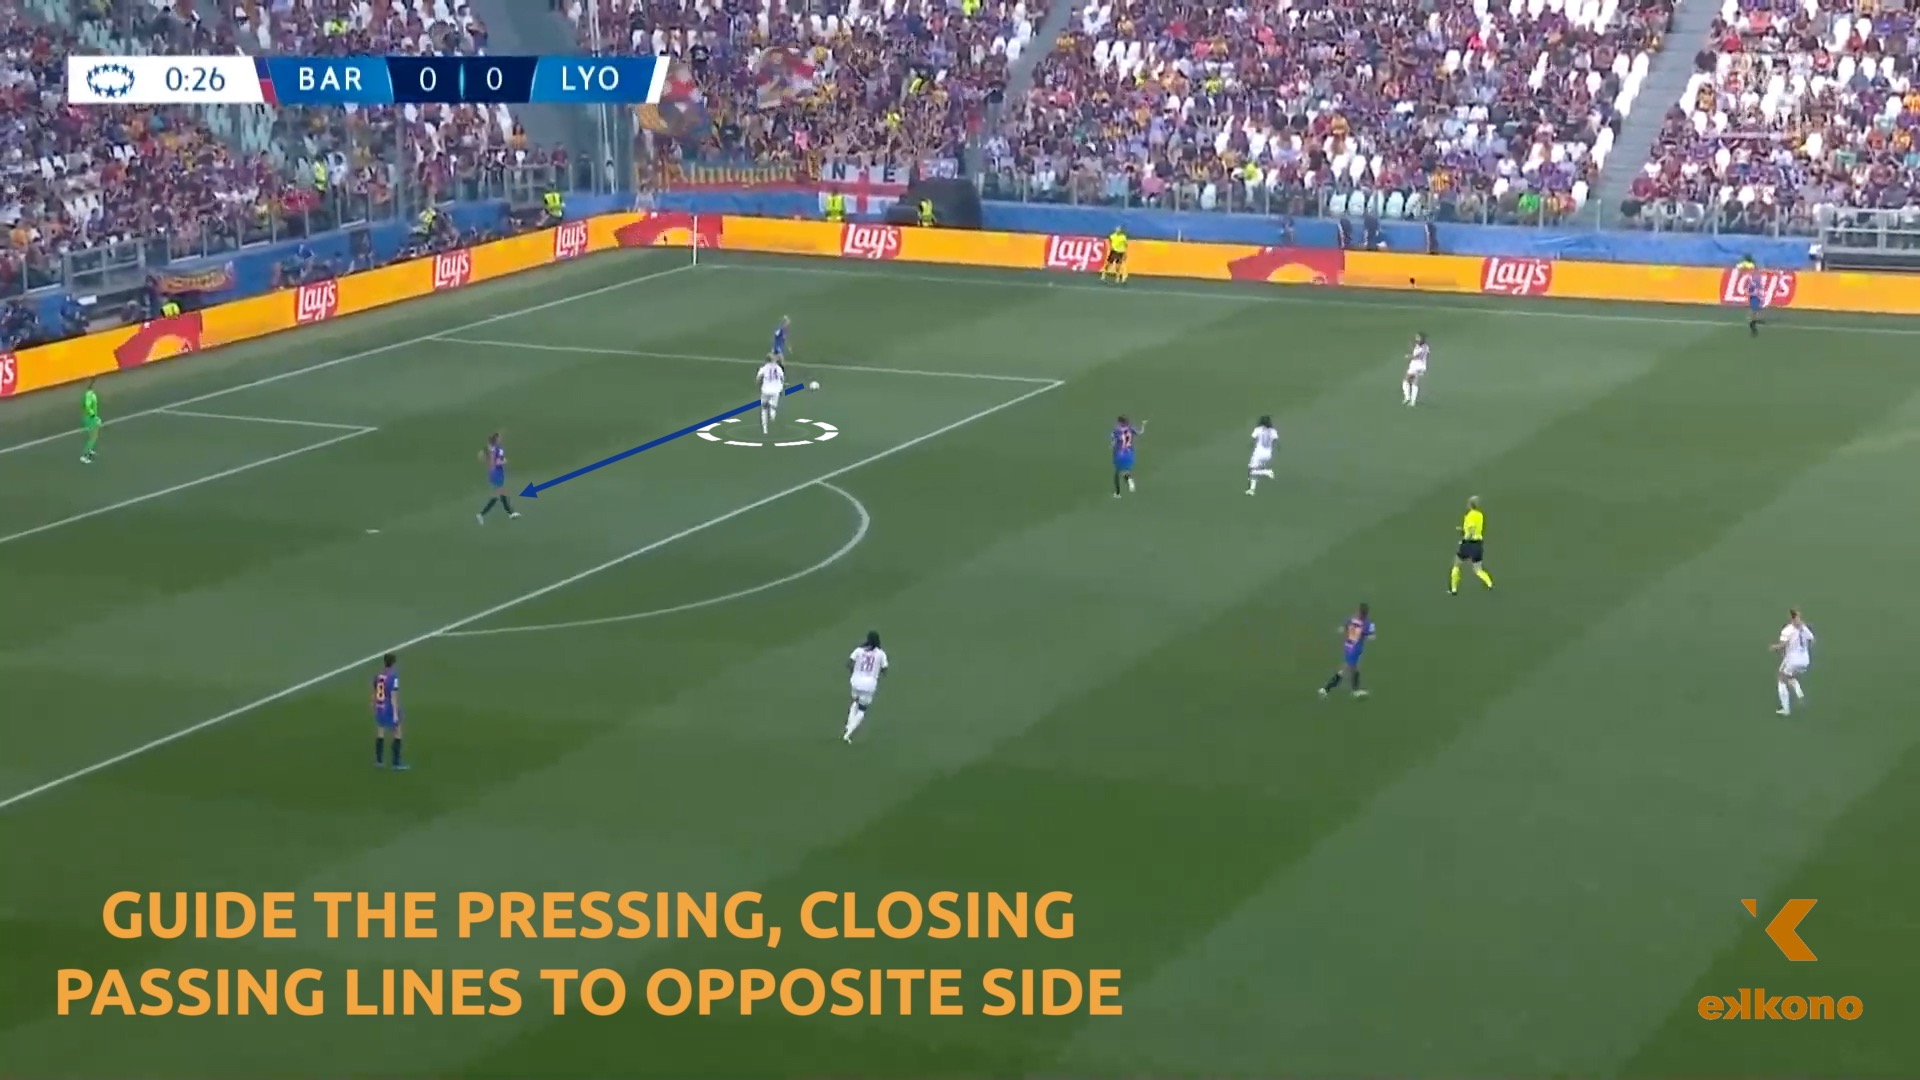 Olympique Lyonnais strikers starts the pressing ensuring to close passing lines to the opposite side.